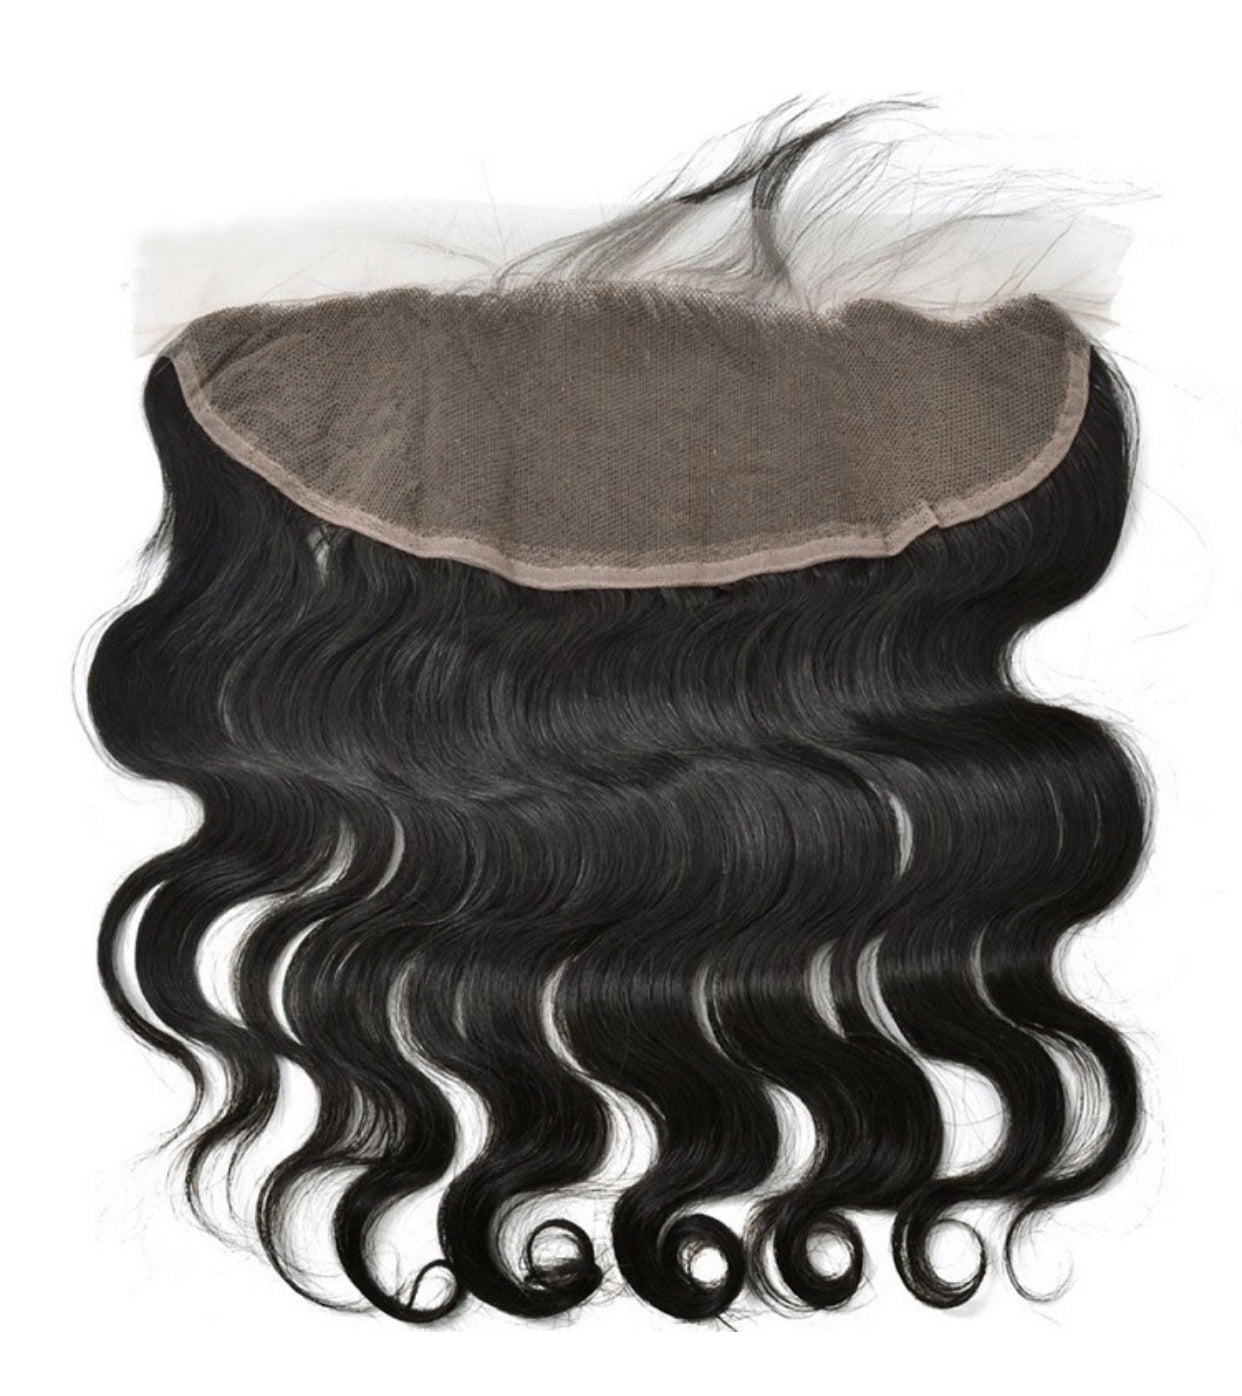 Frontals - Straight & Body Wave